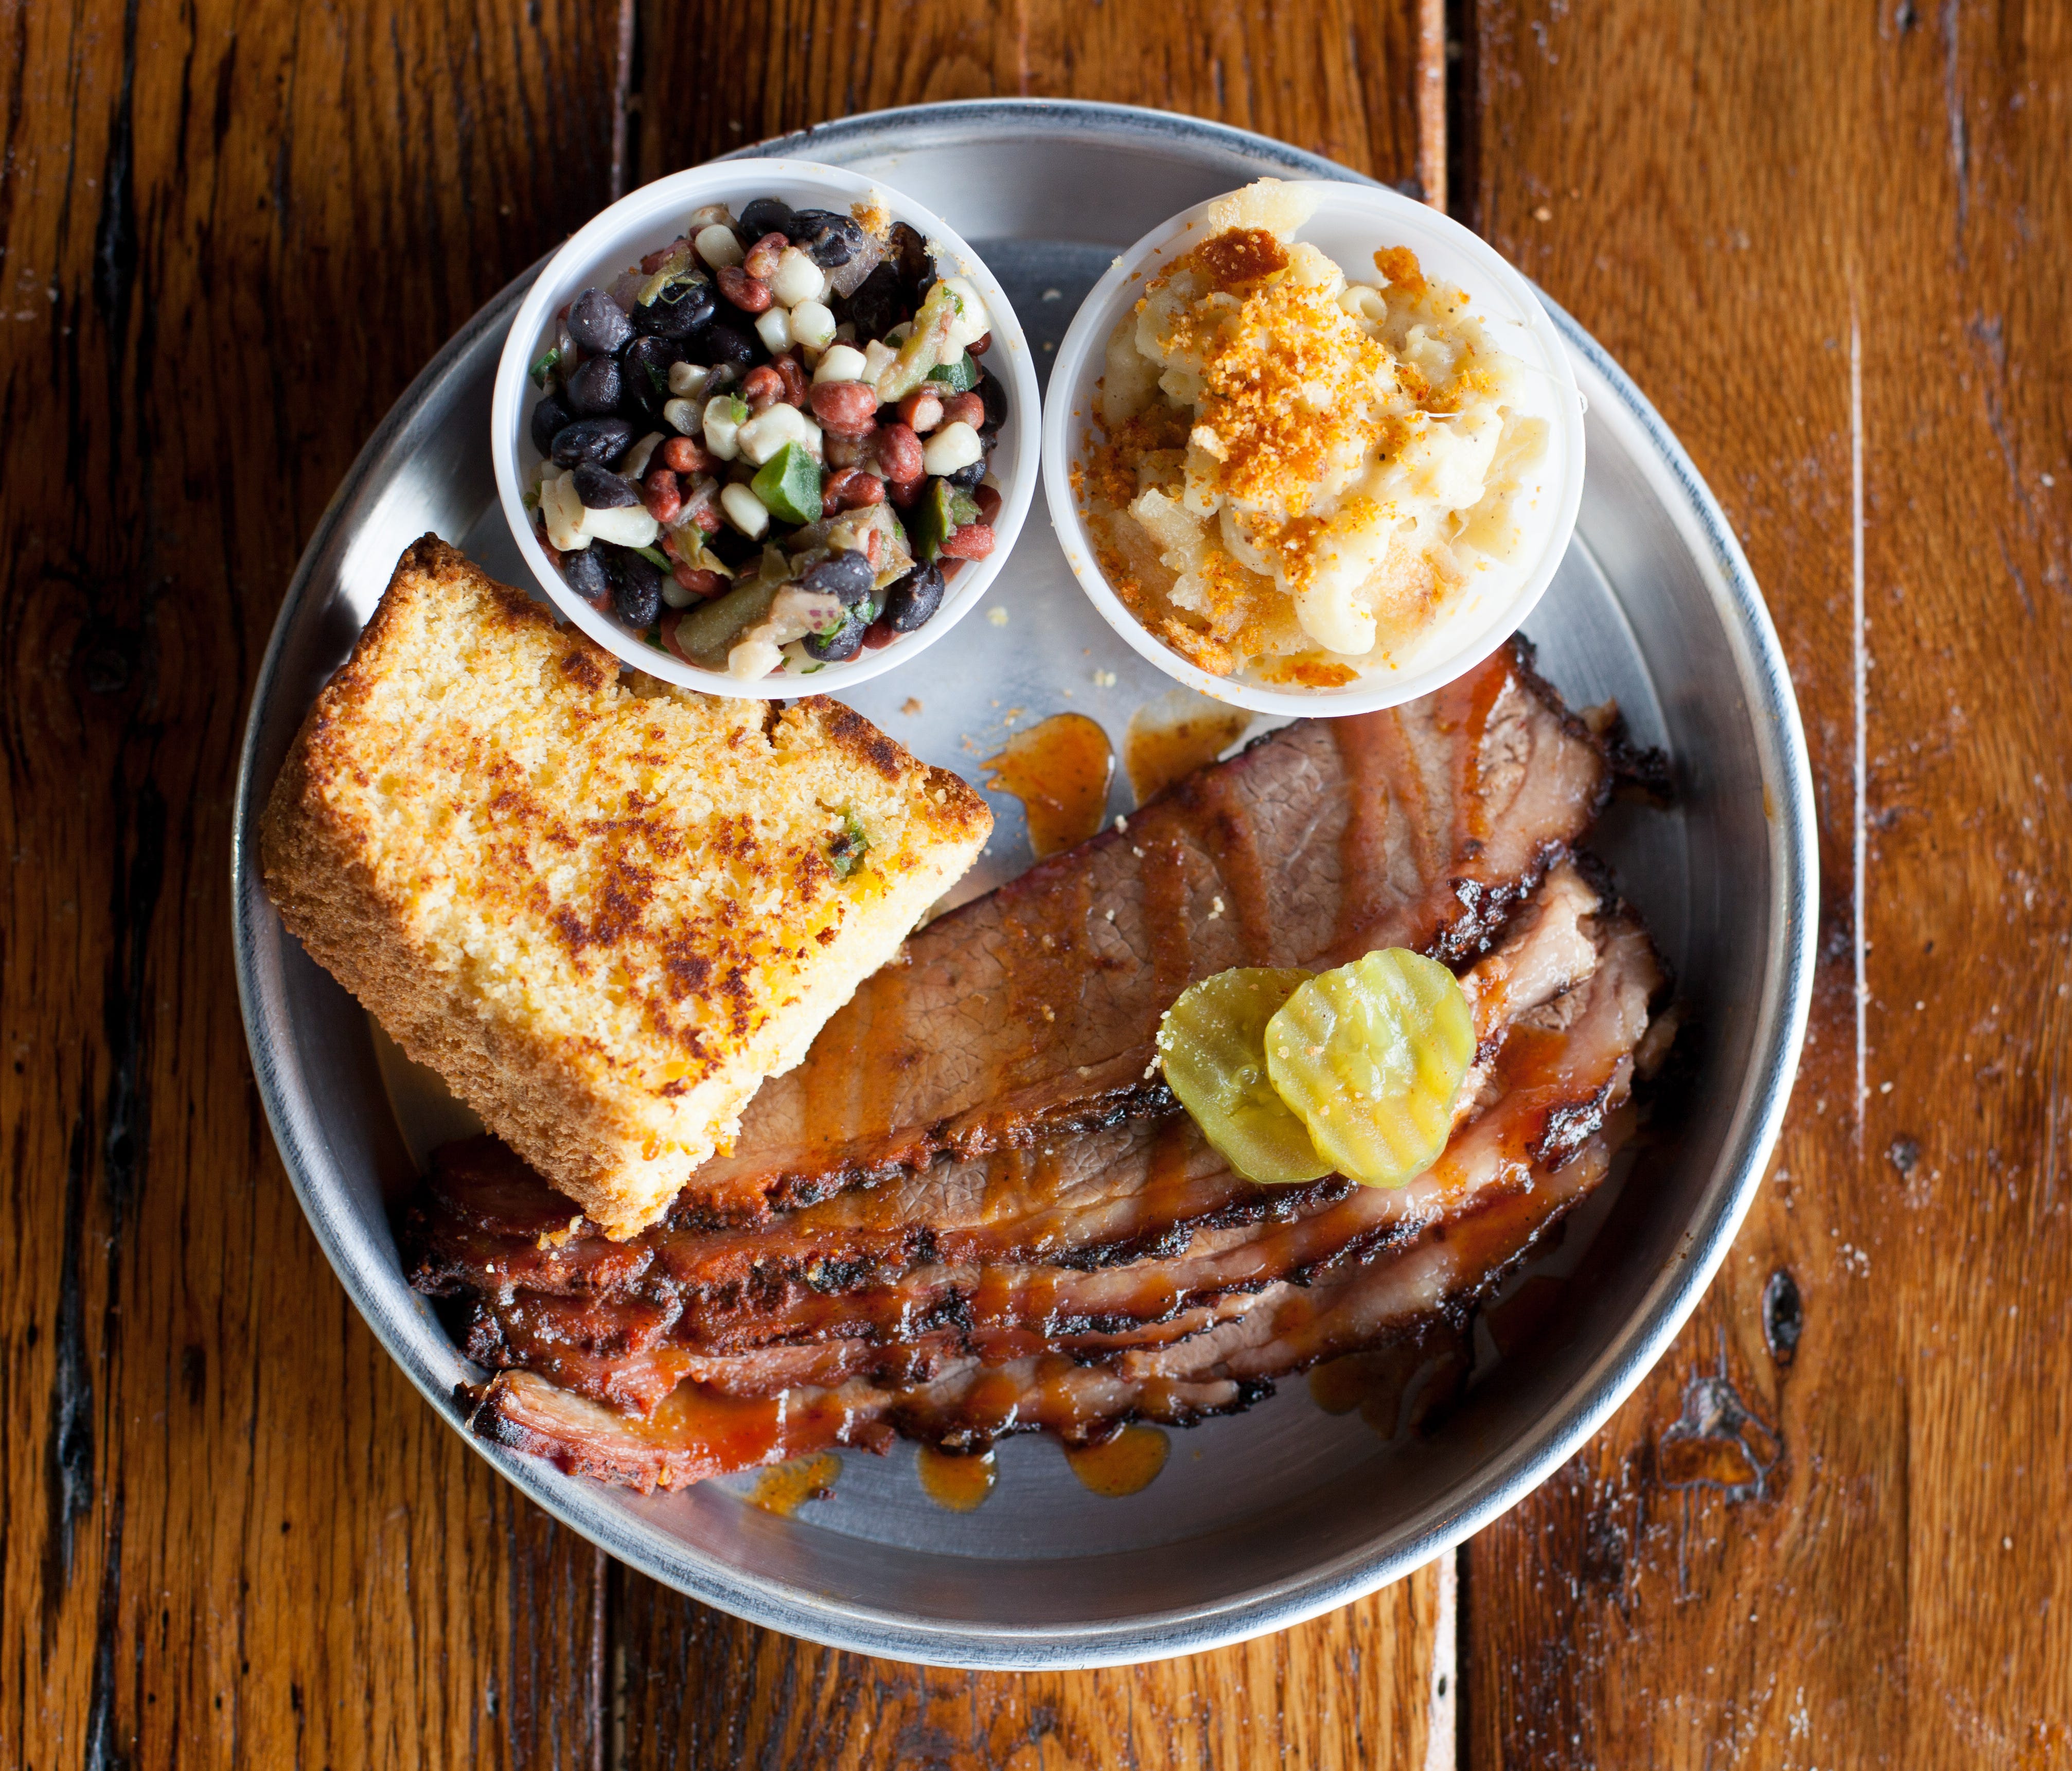 Edley's serves barbecue sandwiches, platters and tacos, such as the brisket platter with cornbread, bean salad and mac-n-cheese.